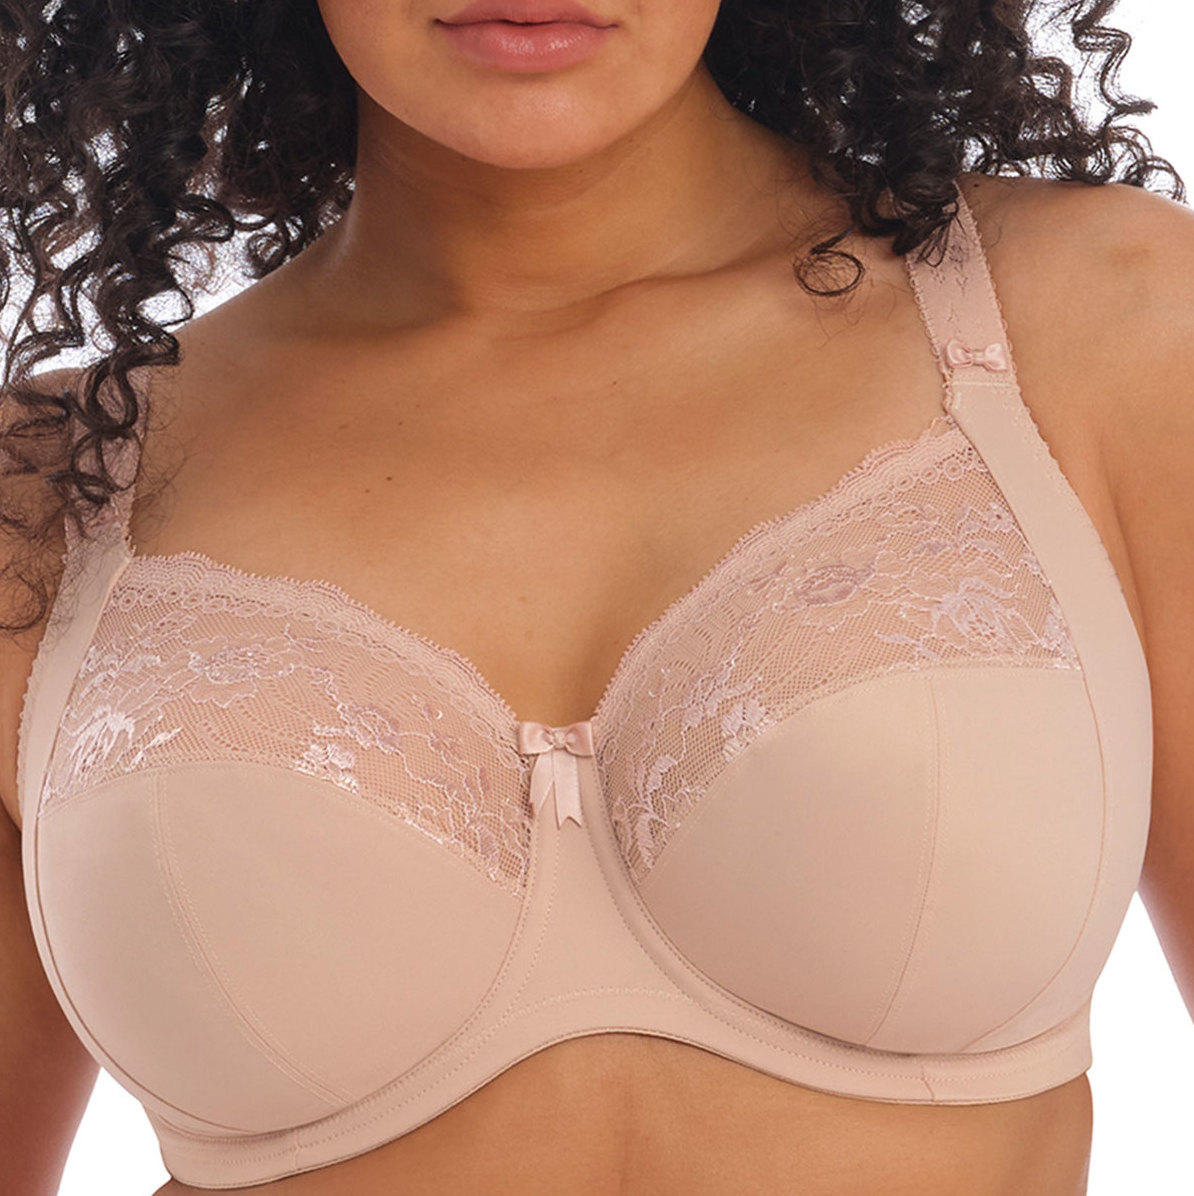 Bra Making - Moulded Cups - Plunge Style, extra boost, with flange (YF162),  BLACK, per pair